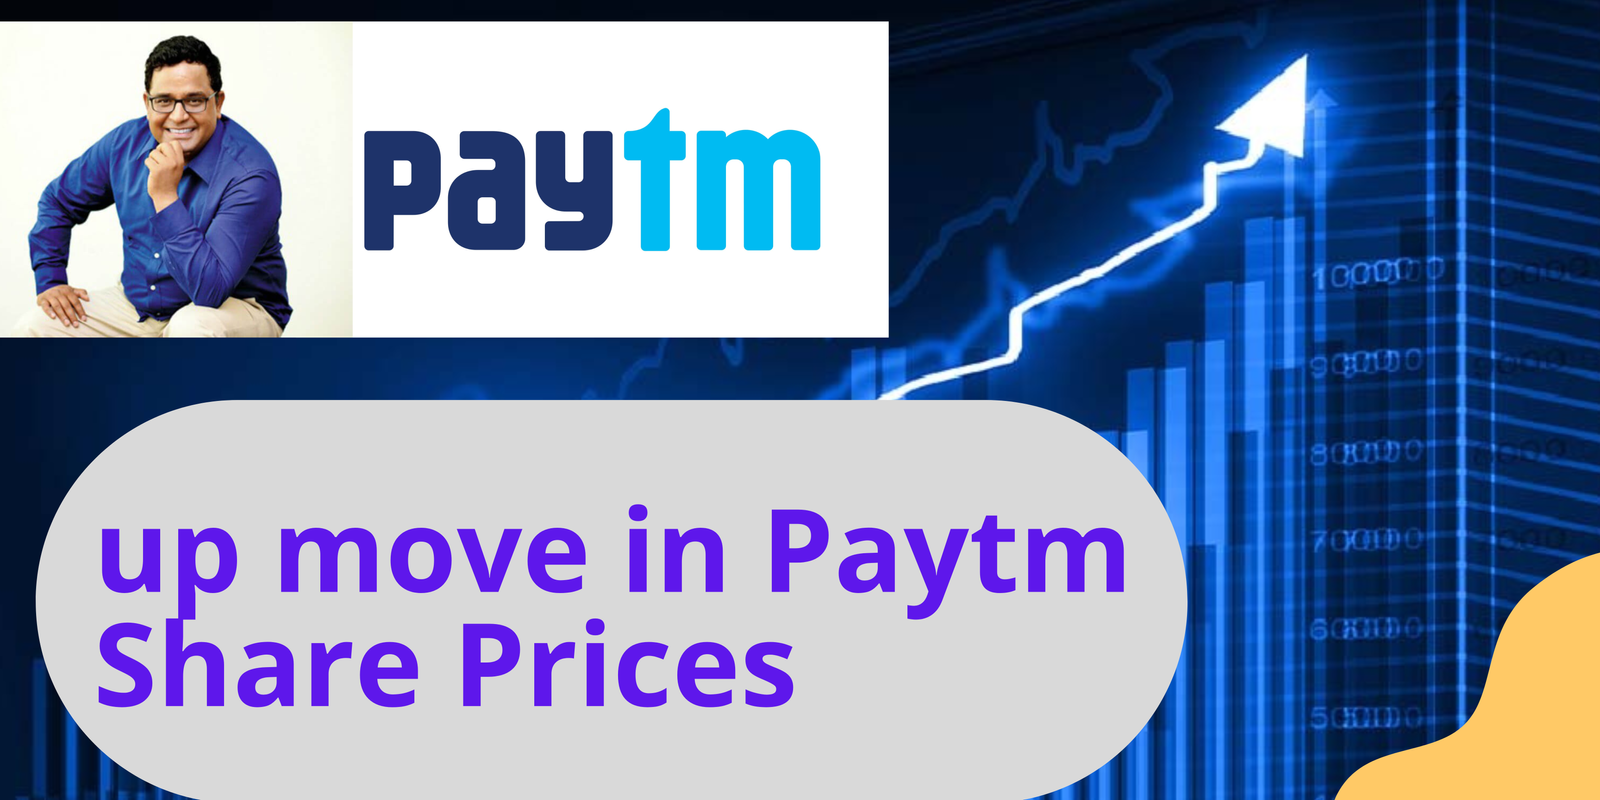 Paytm Share Prices rise by 10%